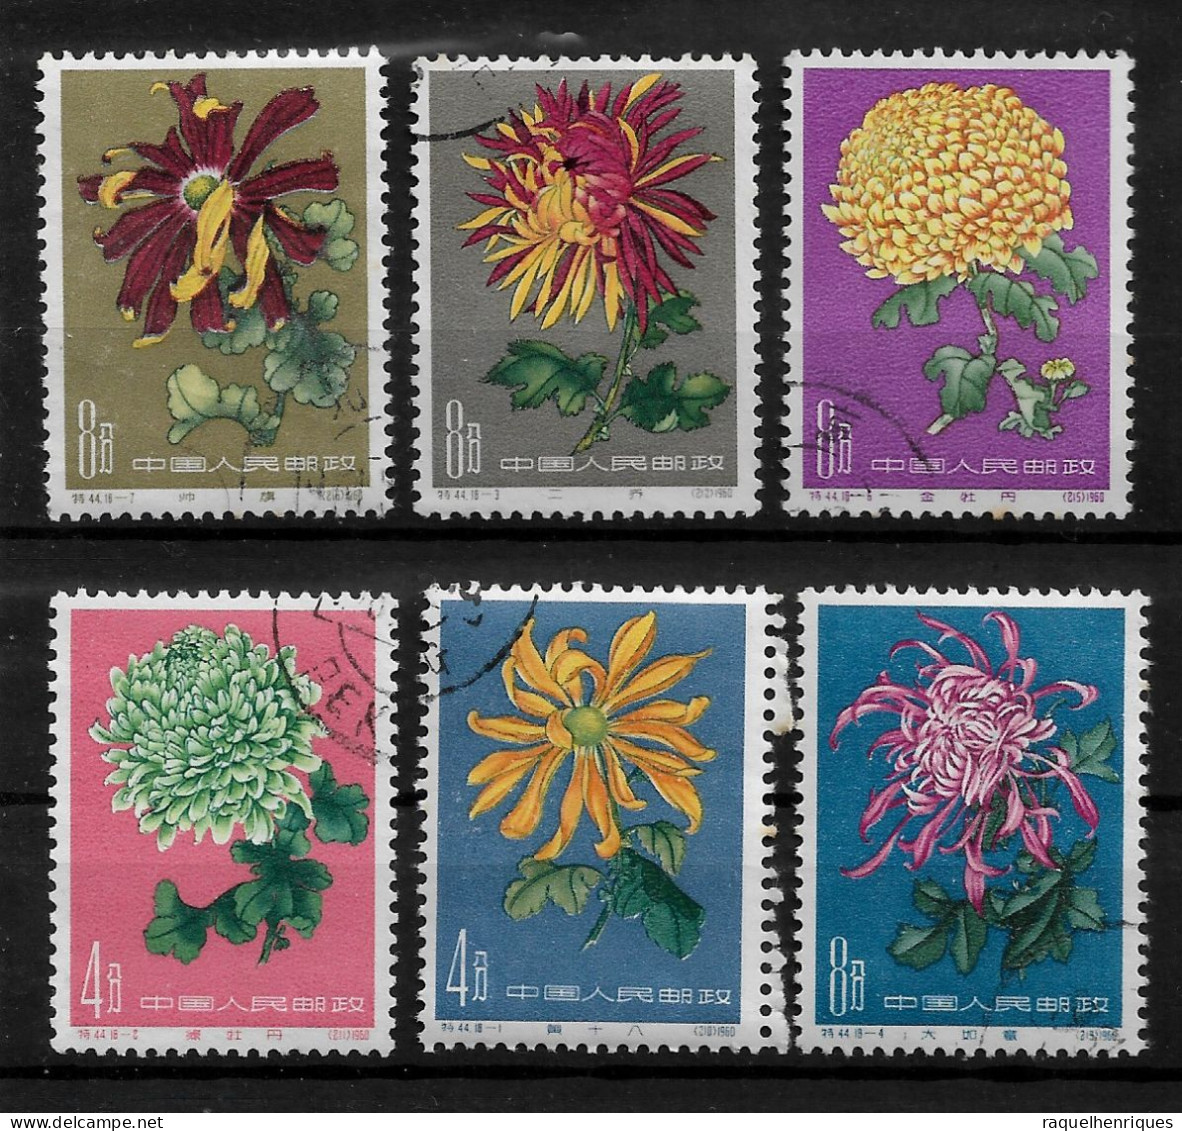 CHINA 1961 Flowers - Chrysanthemums 6 Stamps USED (NP#72-P31) - Nordostchina 1946-48